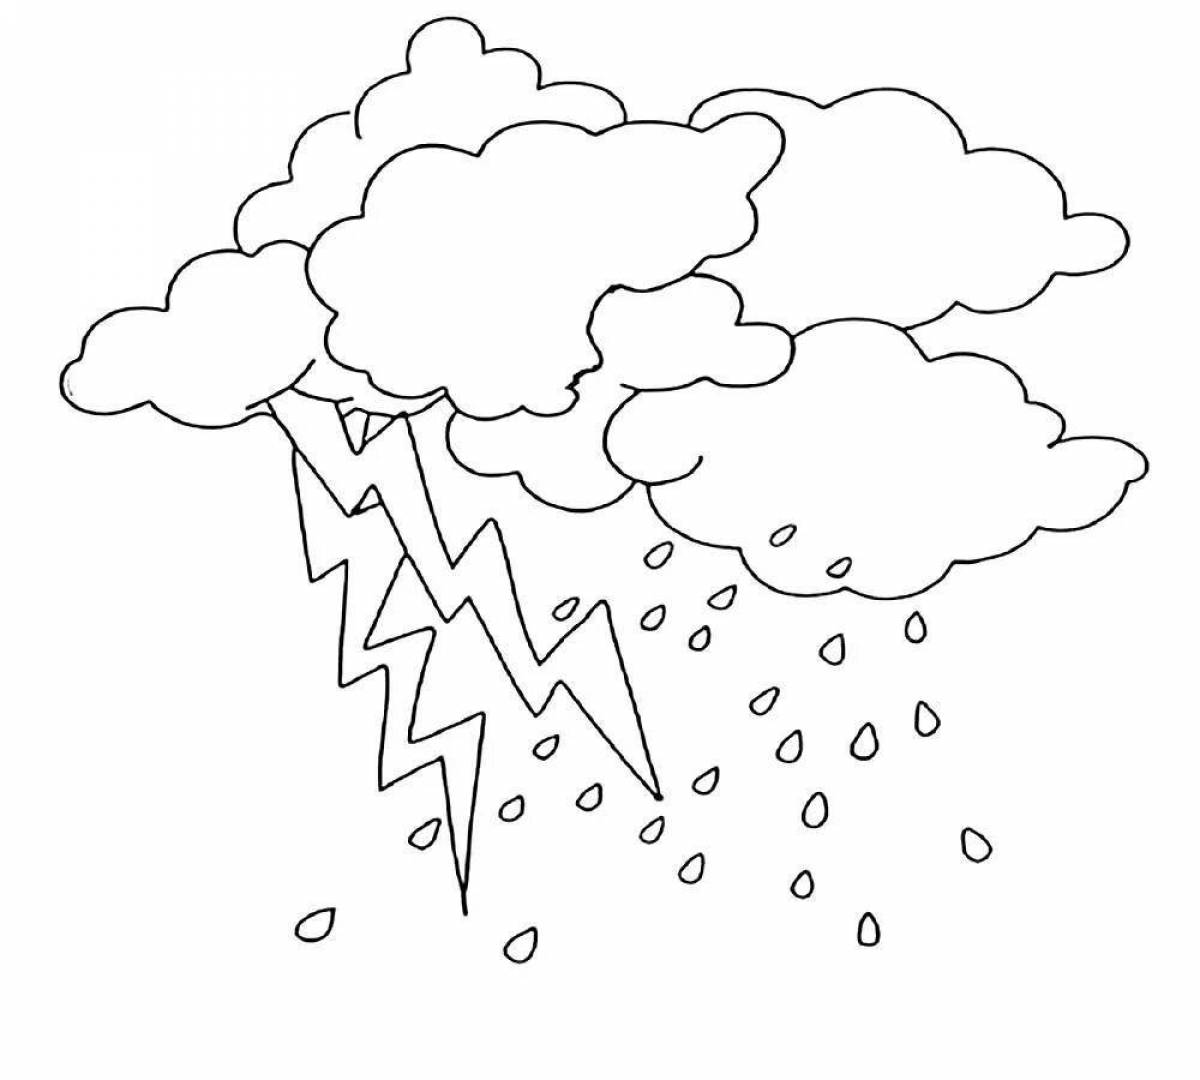 Joyful thunderstorm coloring pages for children